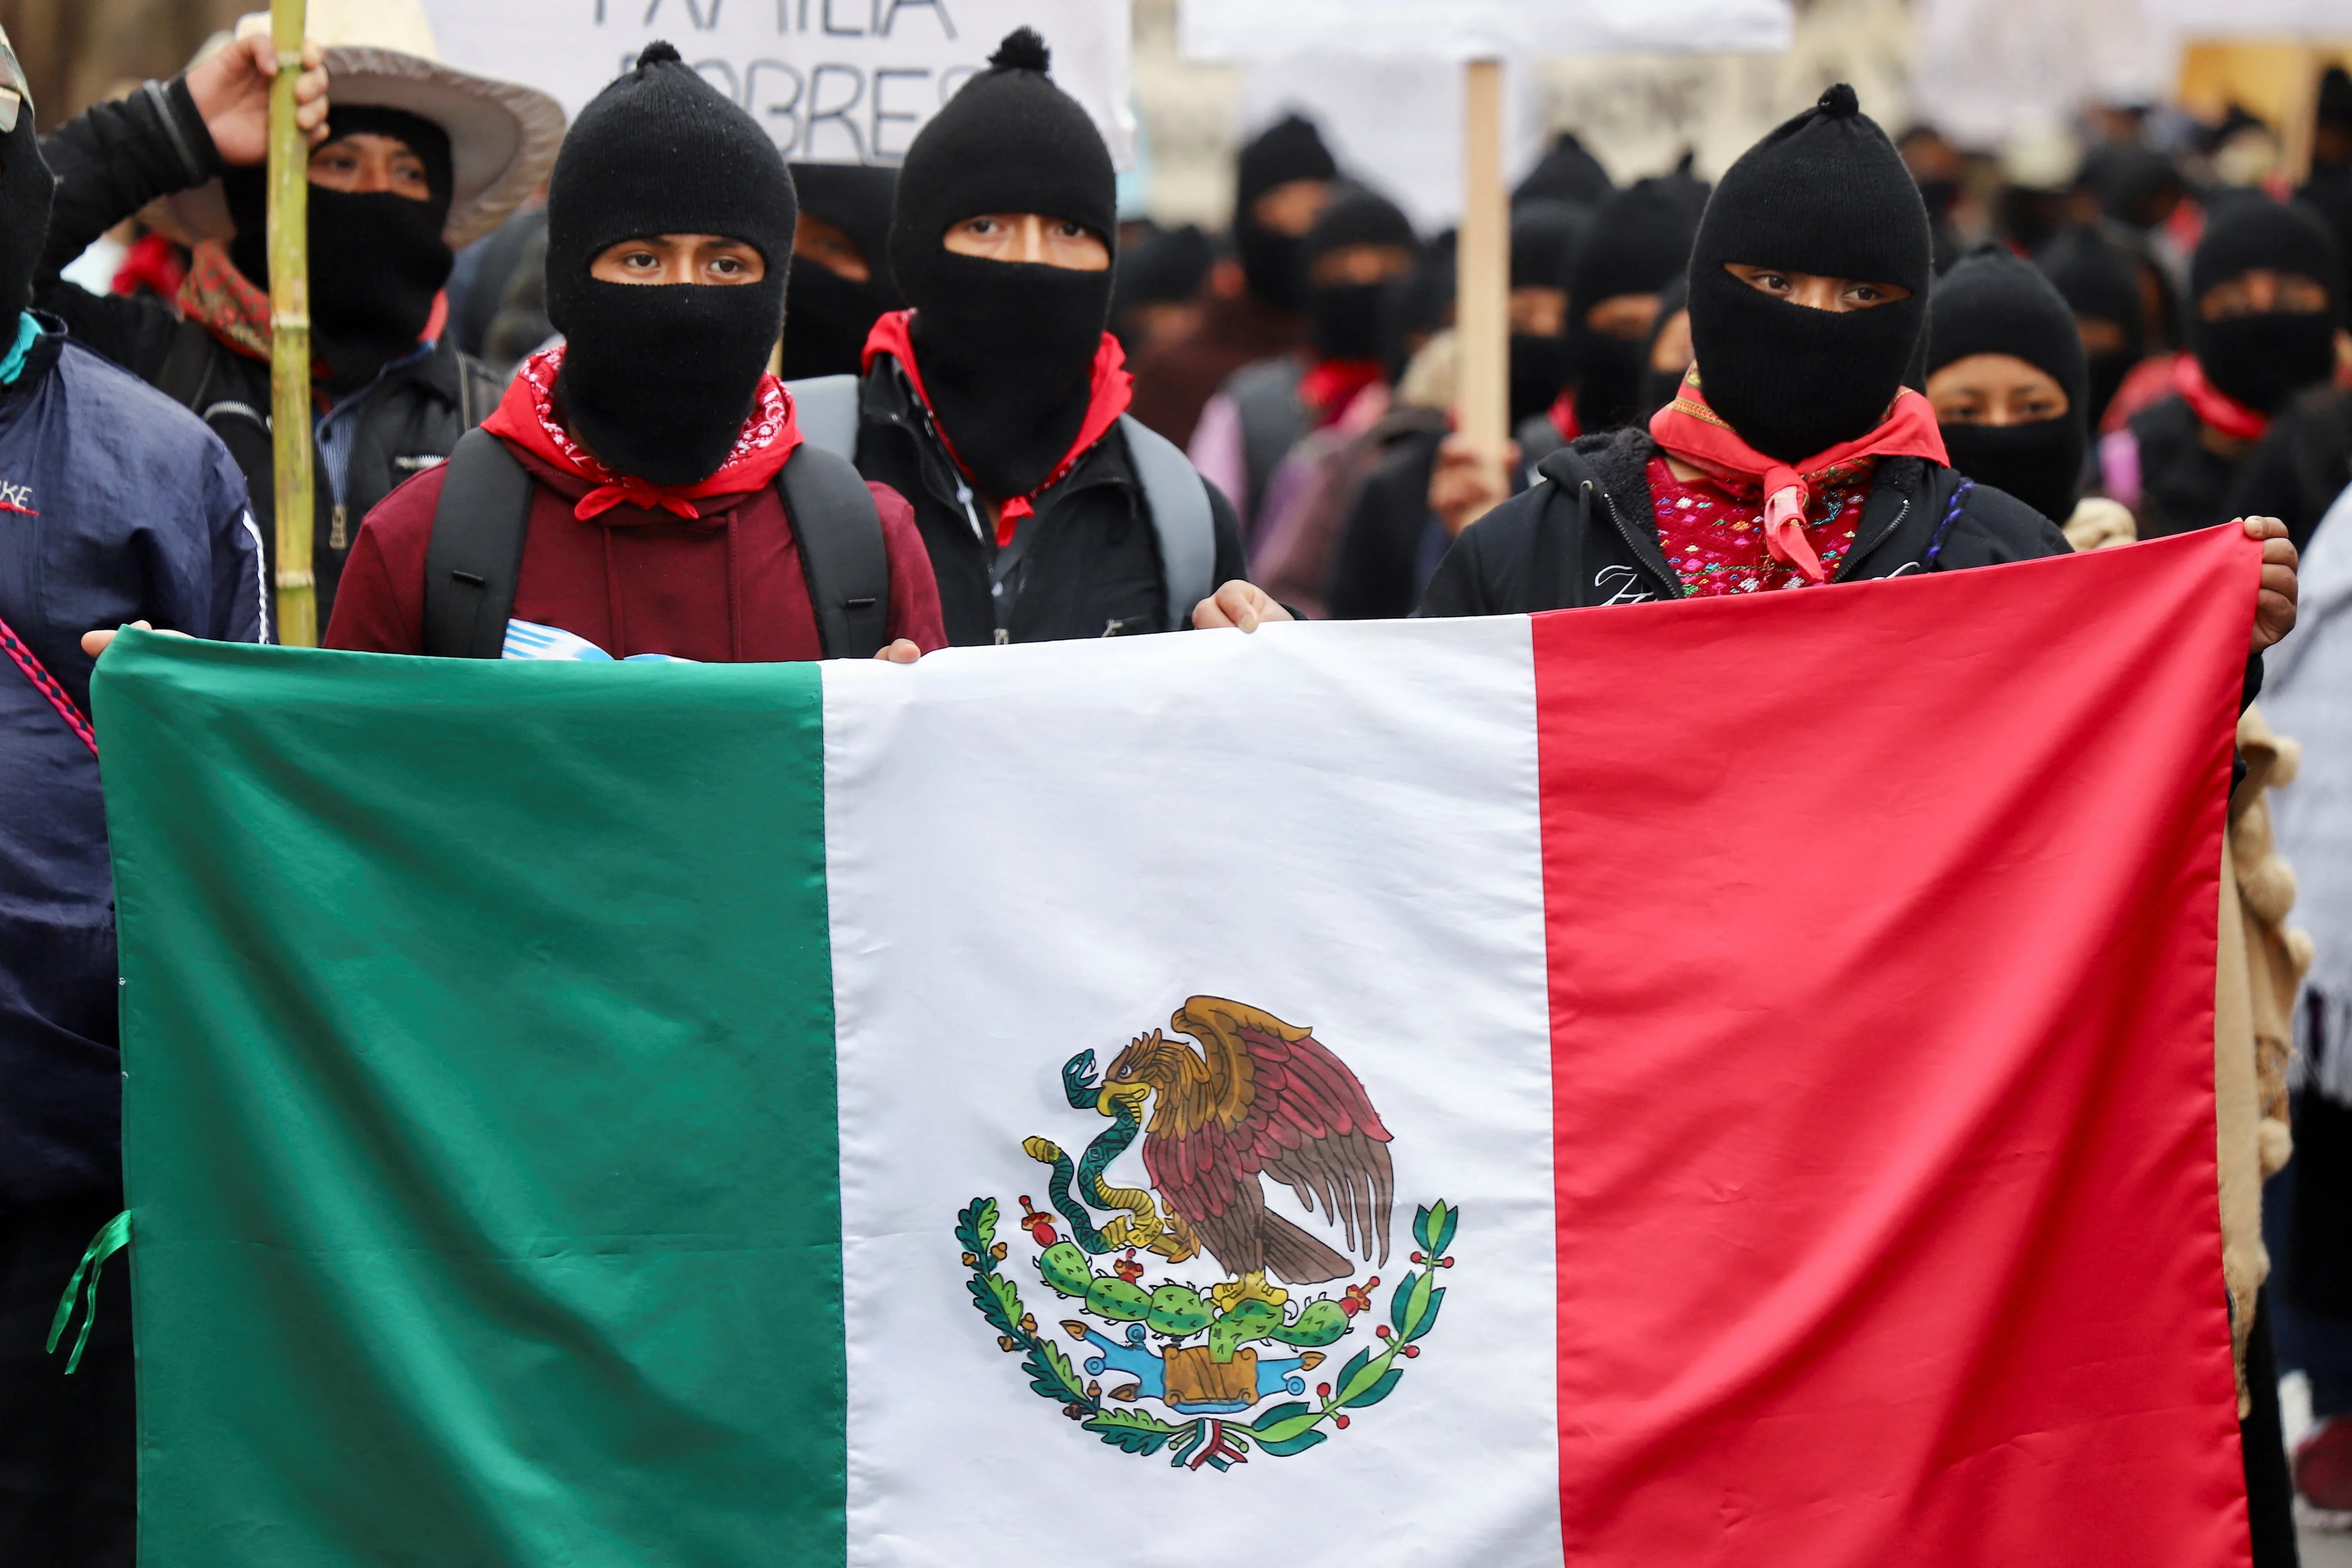 People hold a Mexican flag during a Zapatista National Liberation Army (EZLN) protest against war and capitalism, following Russian invasion of Ukraine, in San Cristobal de las Casas, Chiapas, Mexico March 13, 2022. REUTERS/Jacob Garcia